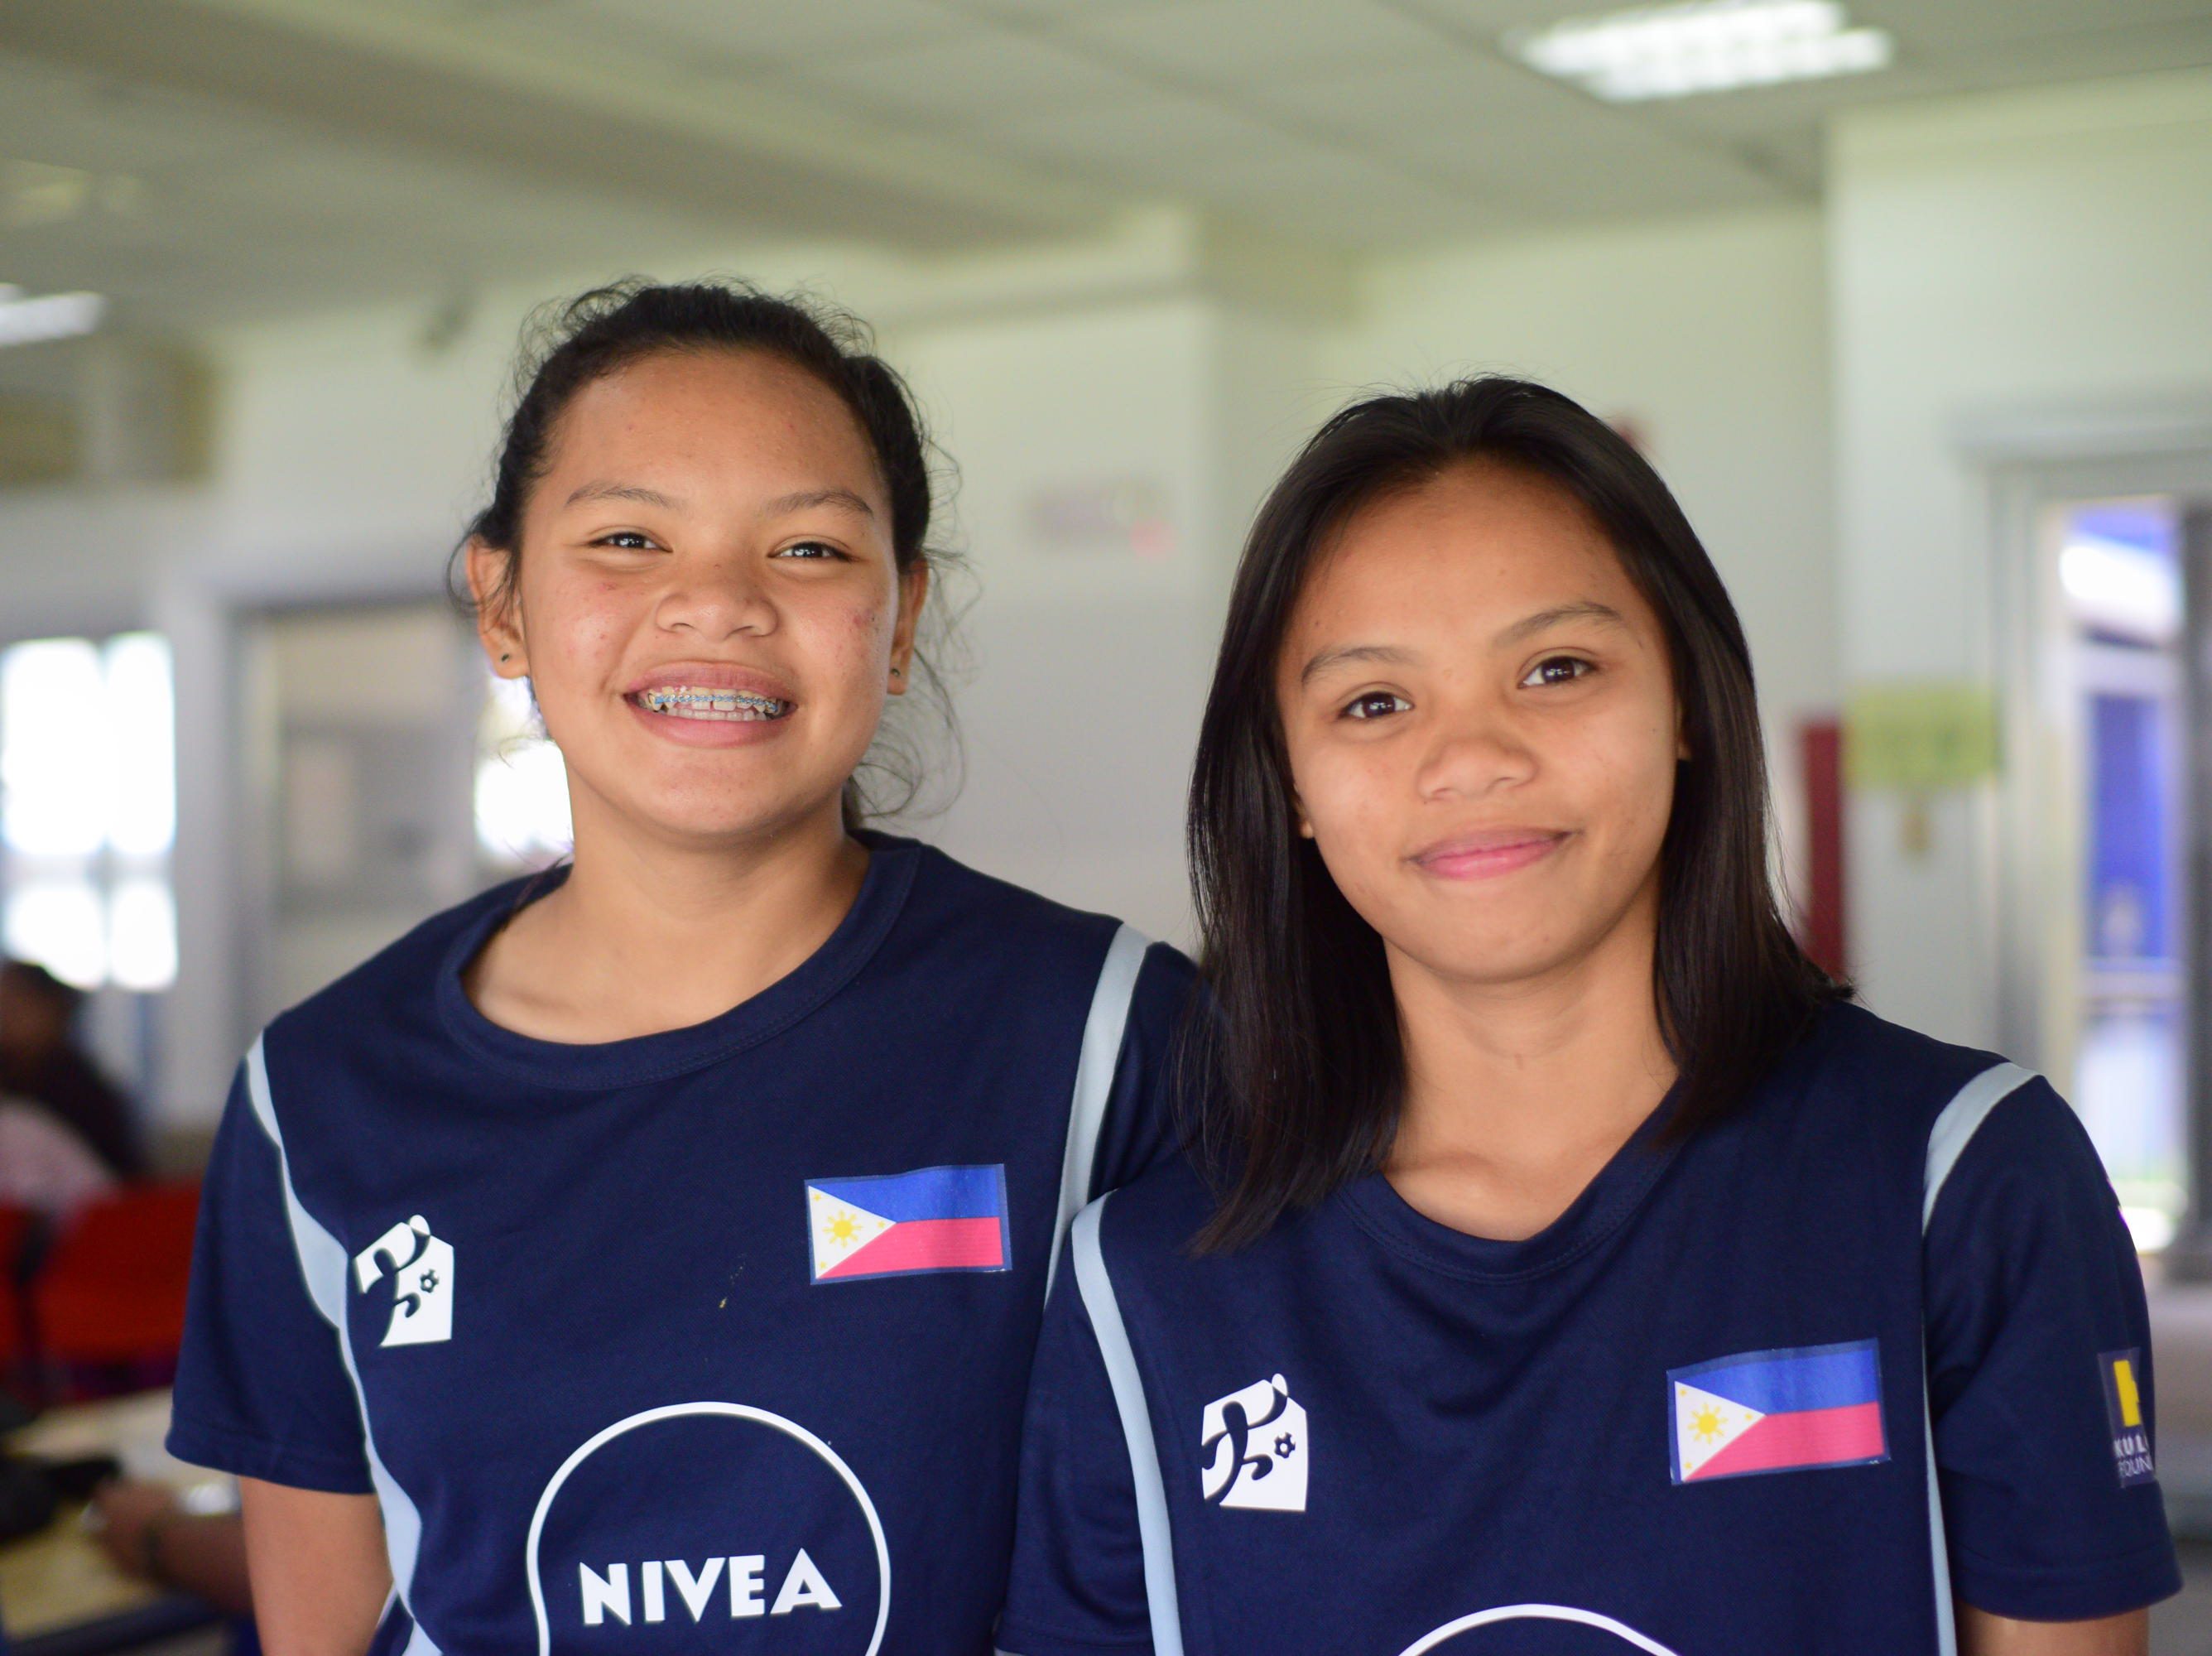 SISTER ACT. Talented siblings Althea (left) and Regine have made some schools take notice.  